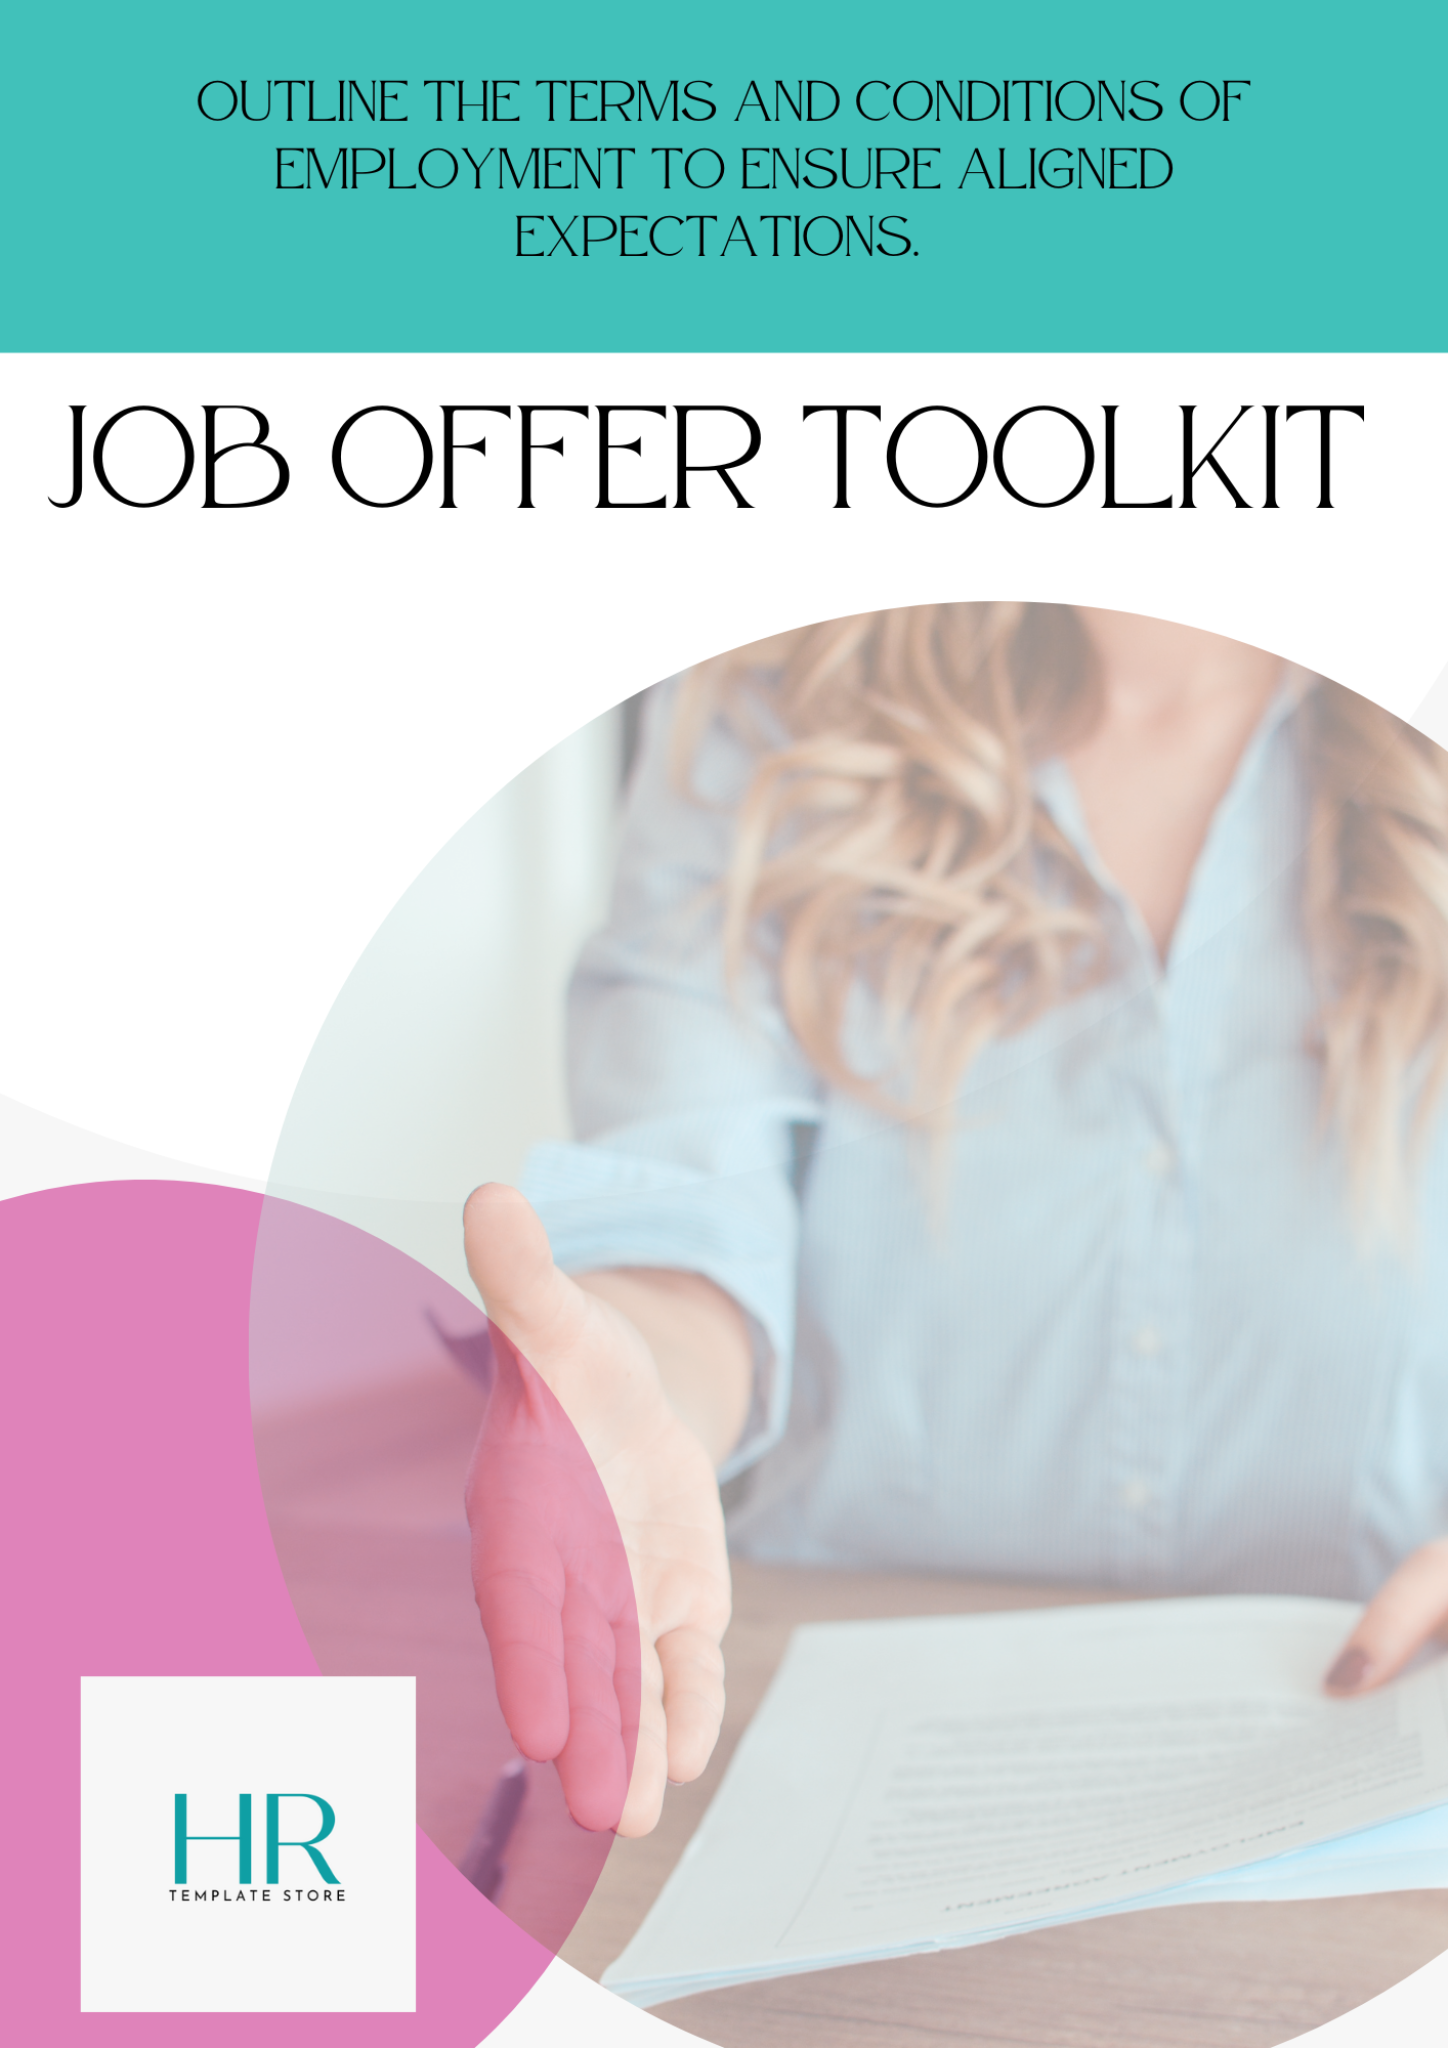 A hand reaching out to grab a job offer toolkit with HR Template Store branding in the background.